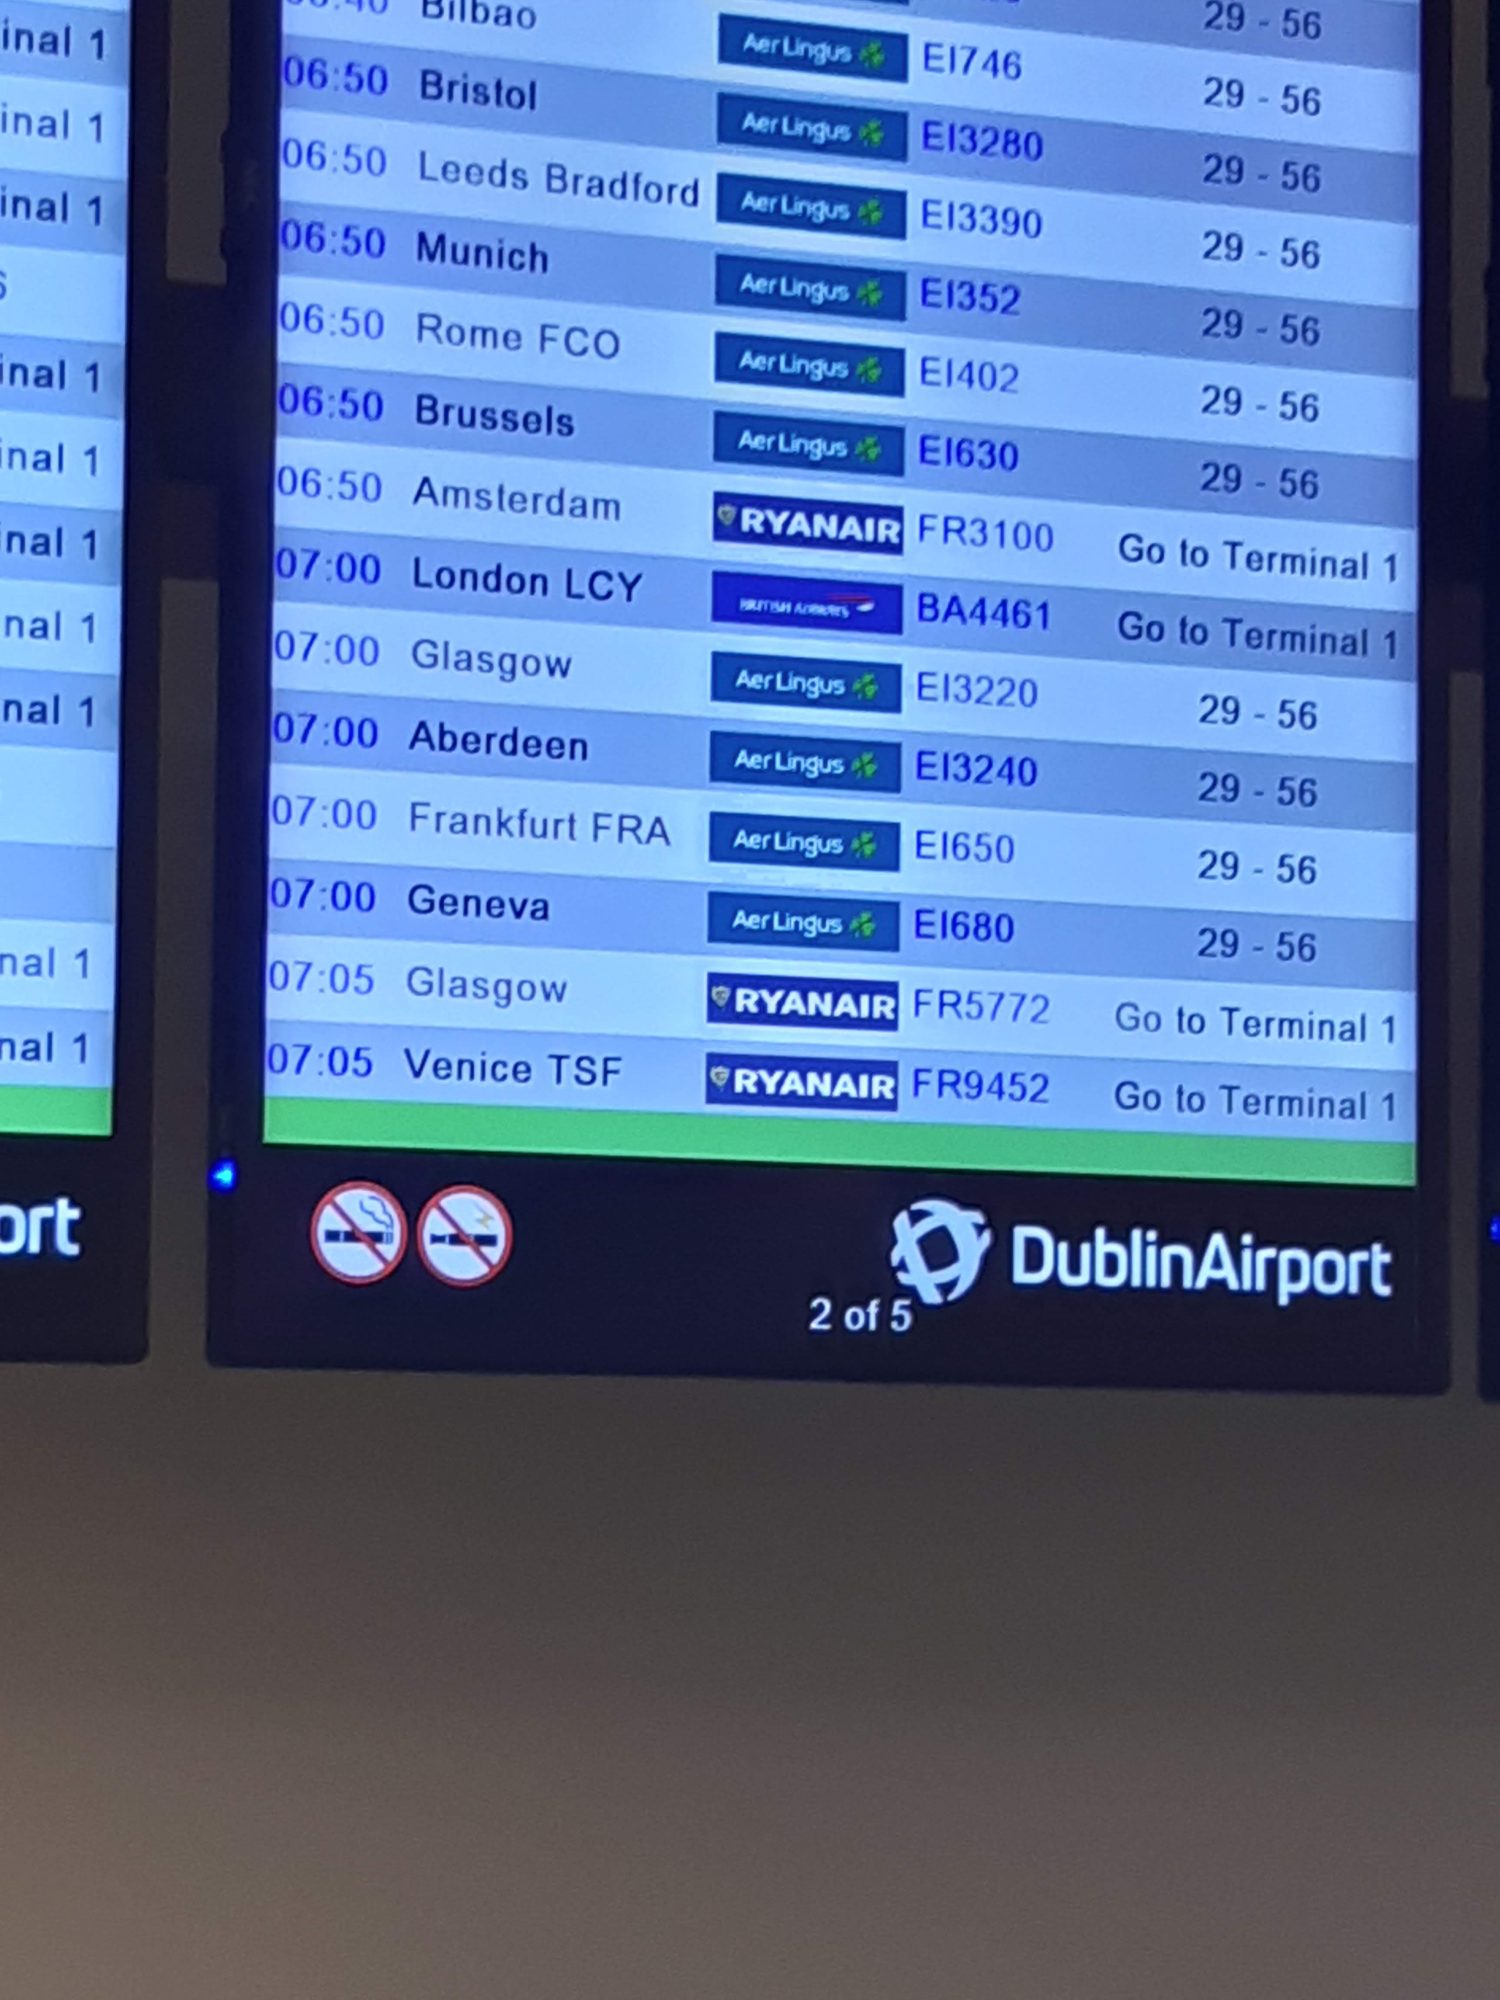 departure-display-boards-at-dublin-airport-terminal-one-ireland